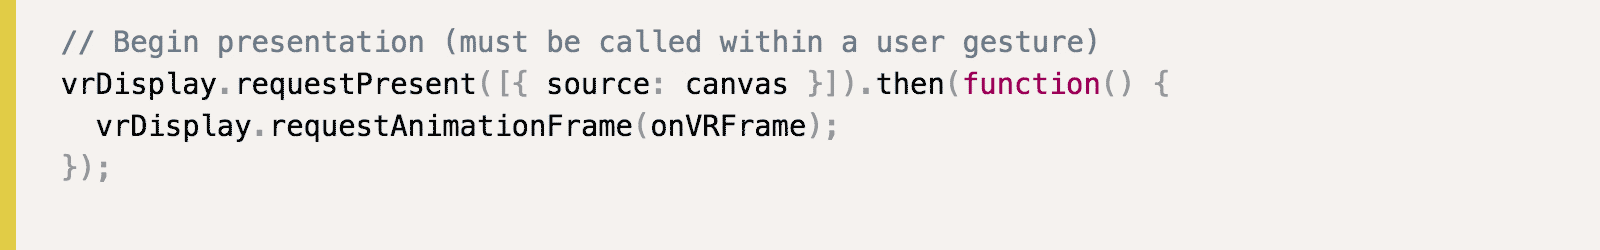 Excerpt from the example code how to use VRDisplays